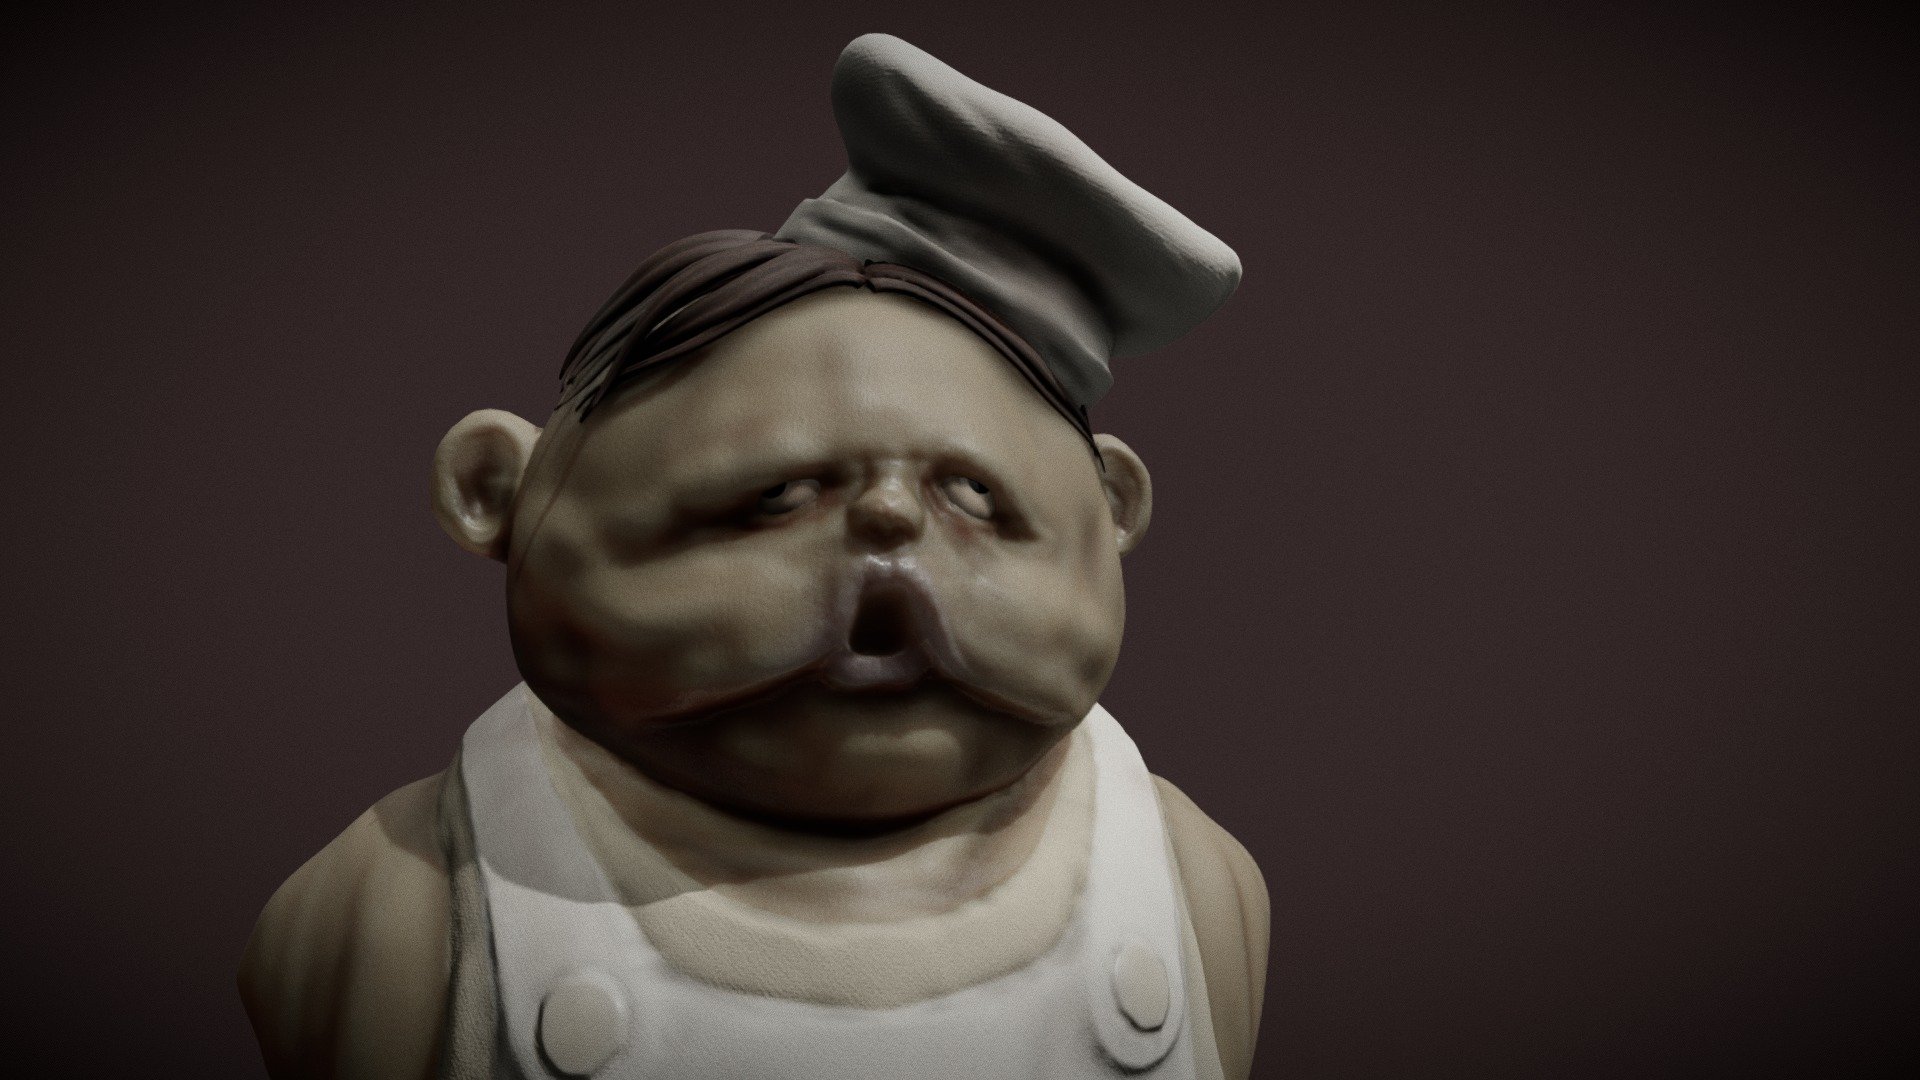 little nightmares chef close up